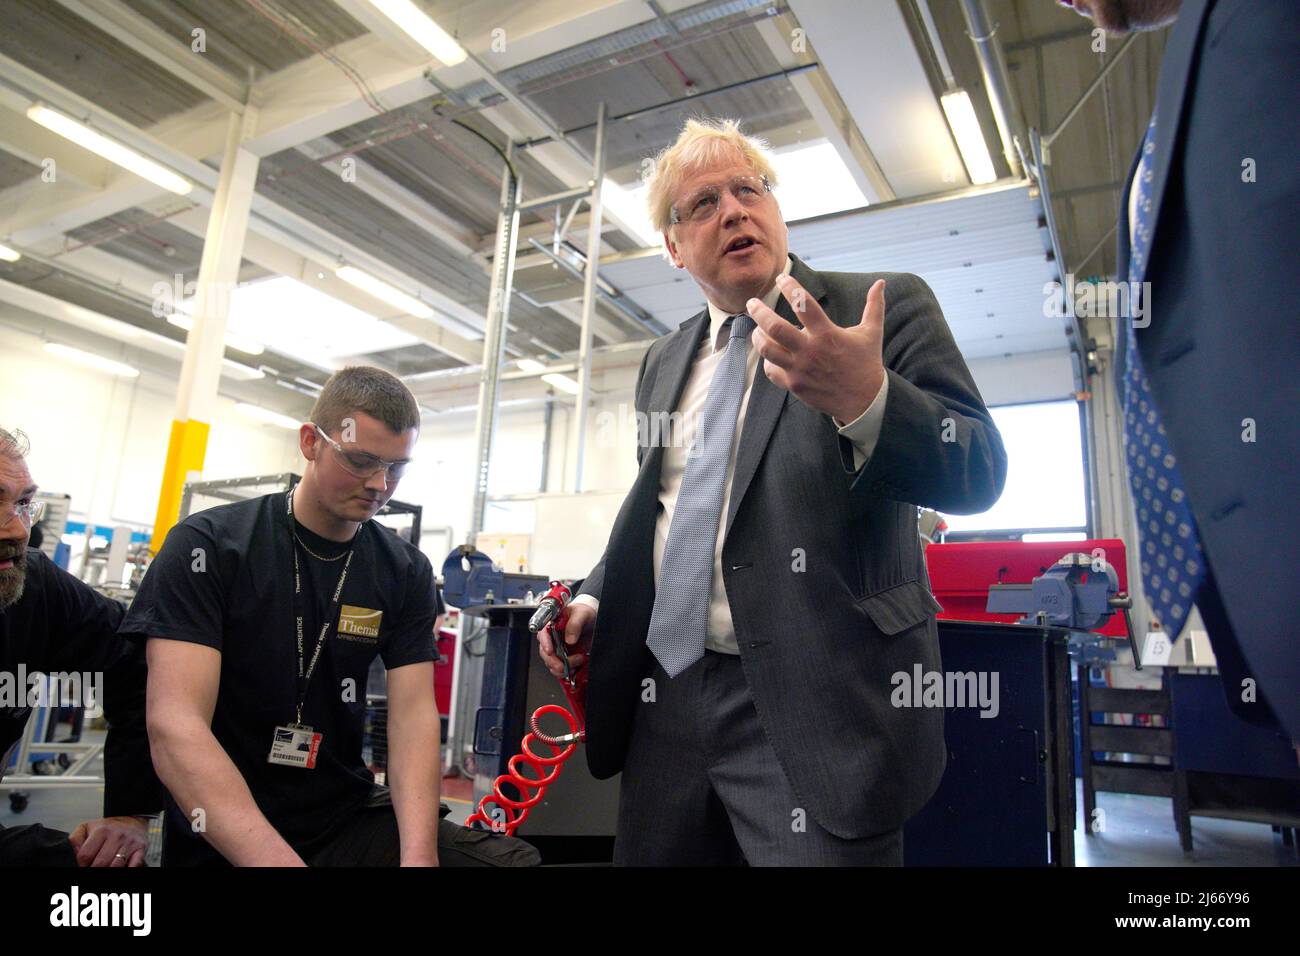 Britain's Prime Minister Boris Johnson holds a rivet gun during a campaign visit to Burnley College Sixth Form Centre in Burnley, Lancashire, Britain April 28, 2022. Peter Byrne/Pool via REUTERS Stock Photo